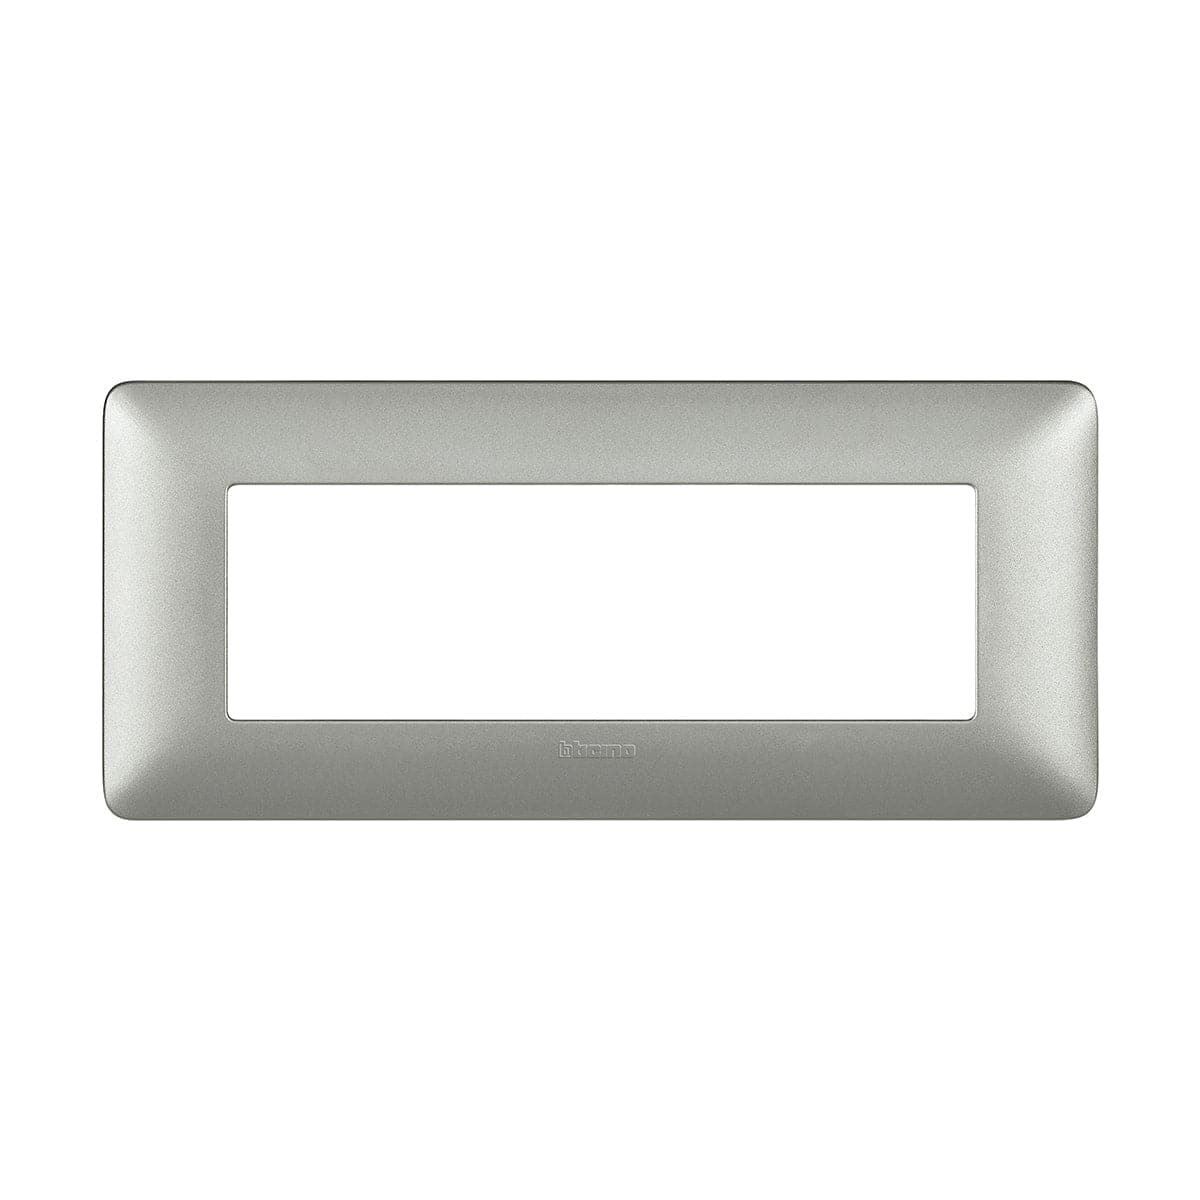 MATIX PLATE 6 PLACES SILVER - best price from Maltashopper.com BR420100847